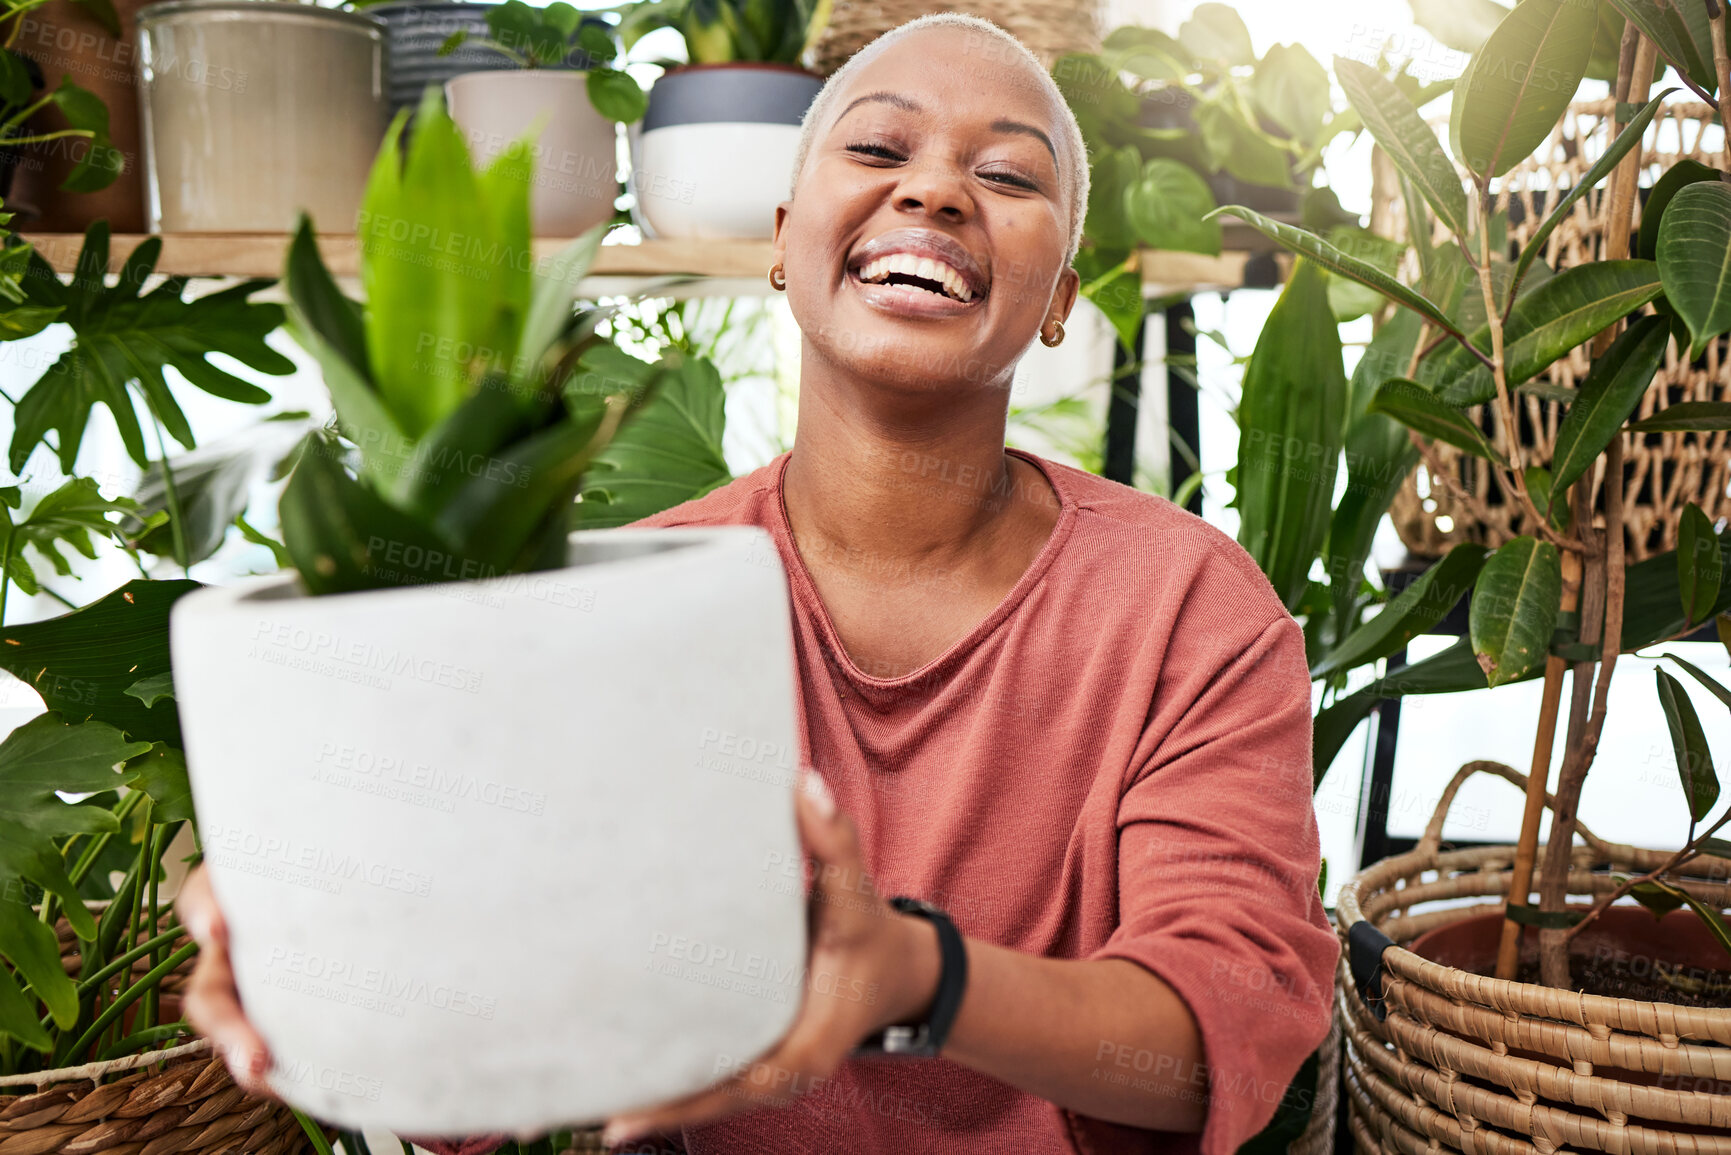 Buy stock photo Happy, smile and woman with a plant in the greenhouse for an eco friendly or sustainable gift. Happiness, calm and African female person with green leaves in pot in the nursery for gardening at home.